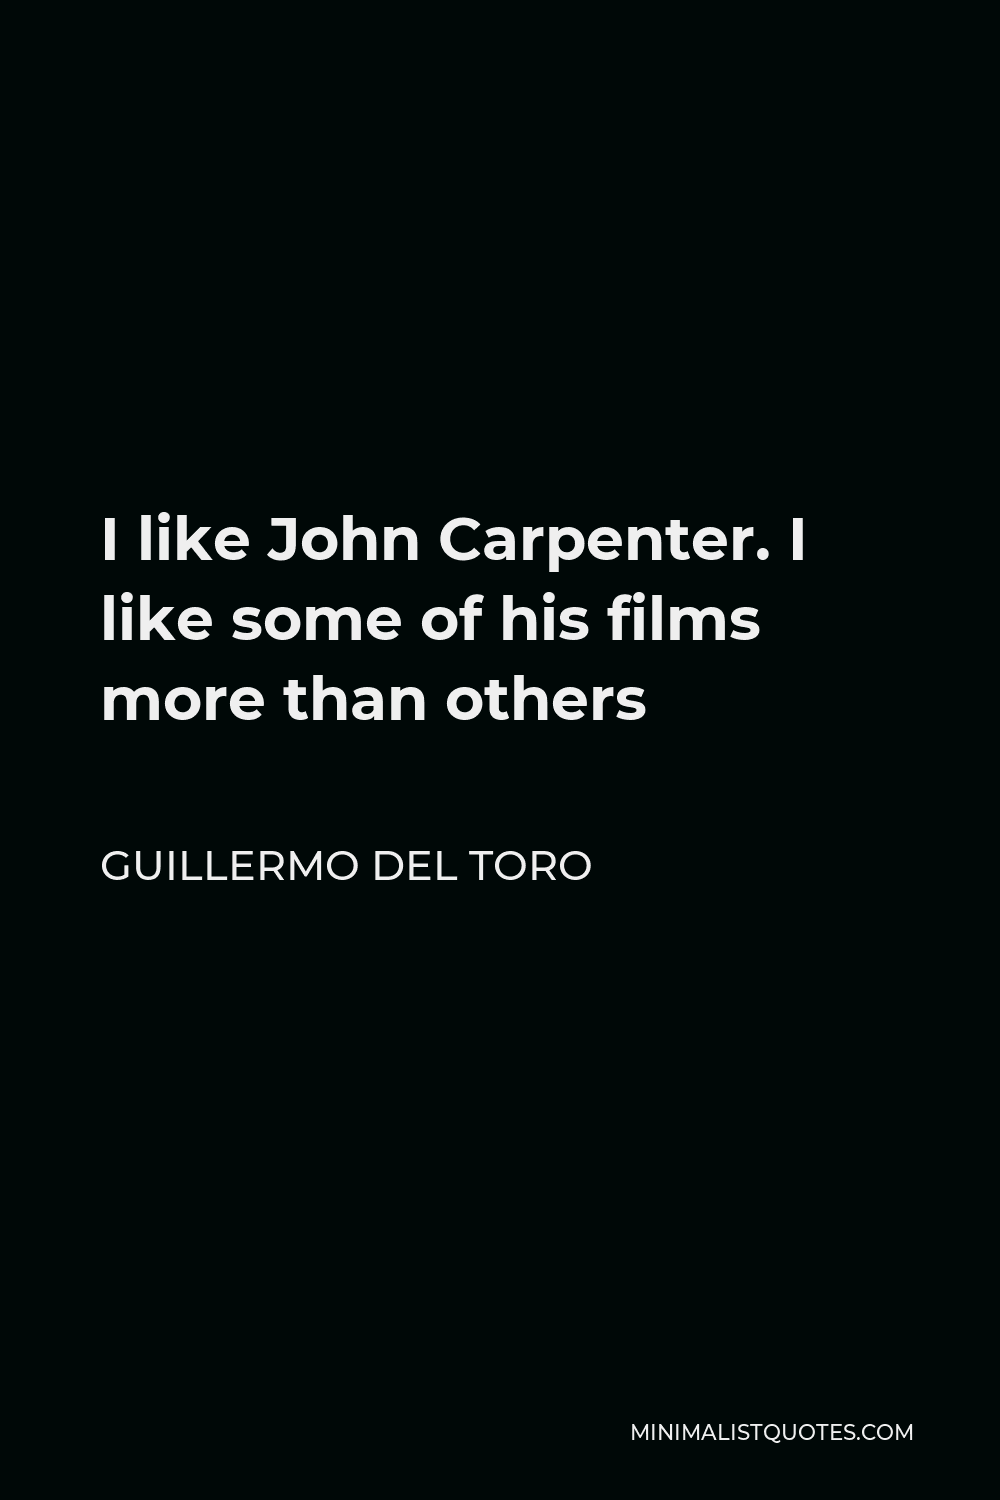 Guillermo del Toro Quote - I like John Carpenter. I like some of his films more than others